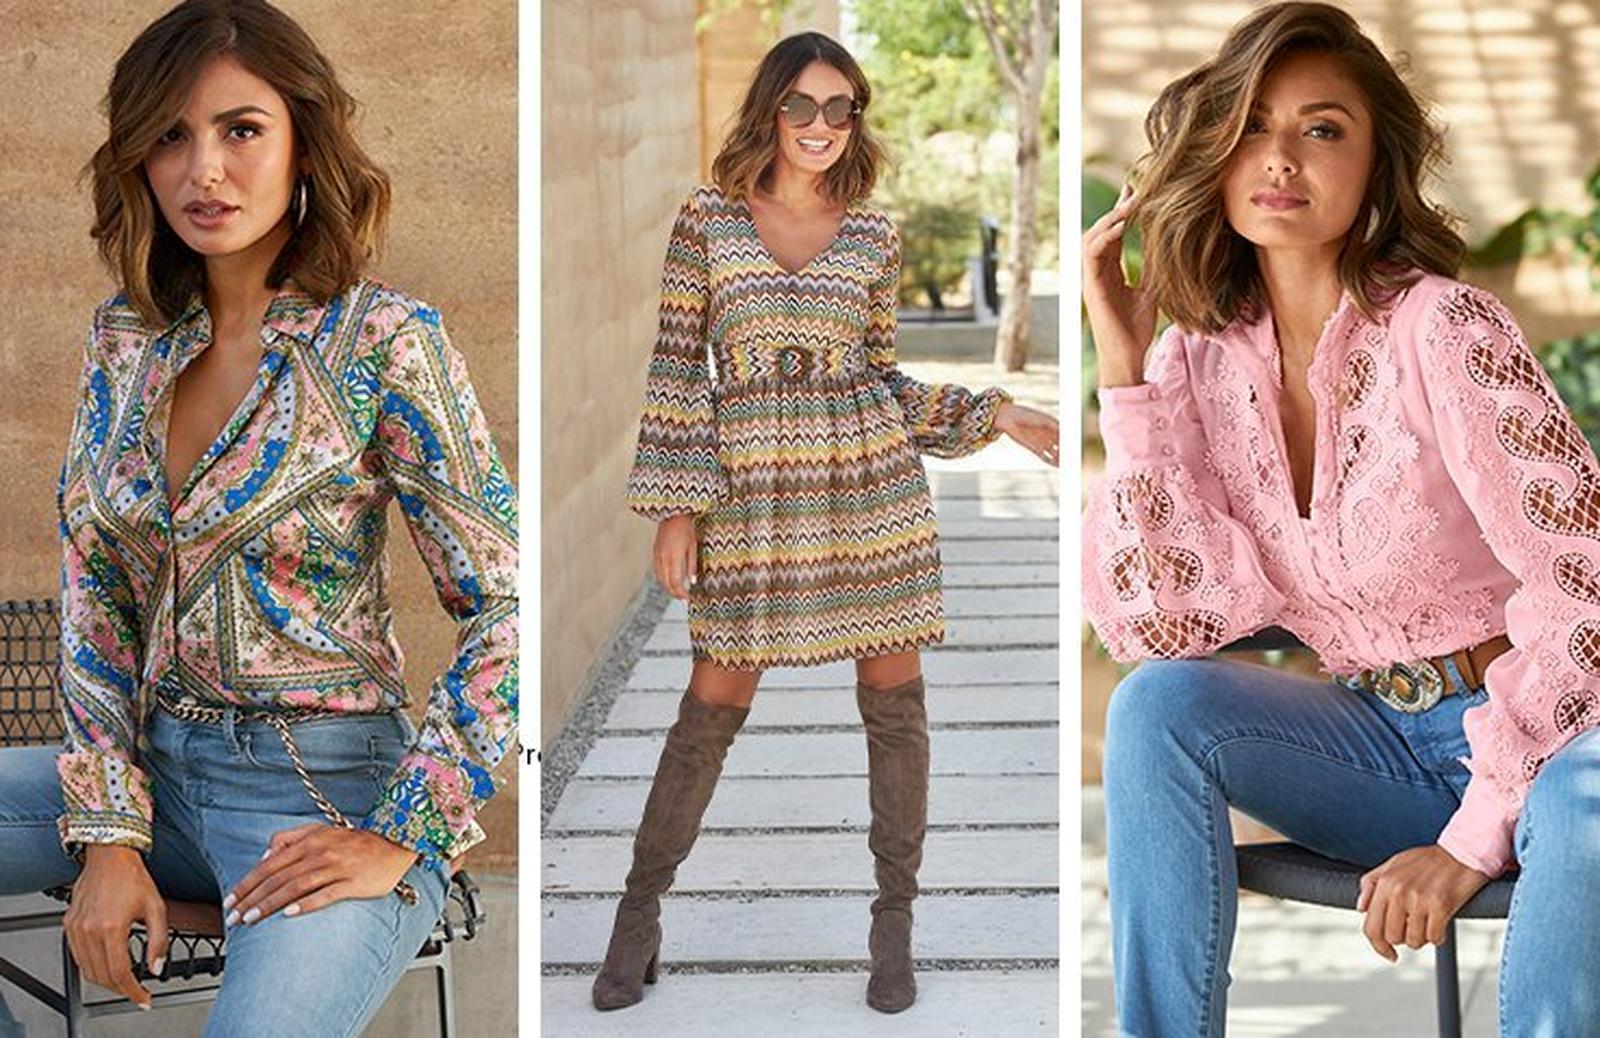 left model wearing a pastel printed button-down long sleeve charmeuse blouse, gold chain belt, and jeans. middle model wearing a neutral chevron print long-sleeve belted dress, sunglasses, and taupe over-the-knee boots. right model wearing a pink lace long-sleeve button-down top, stone embellished belt, and jeans.